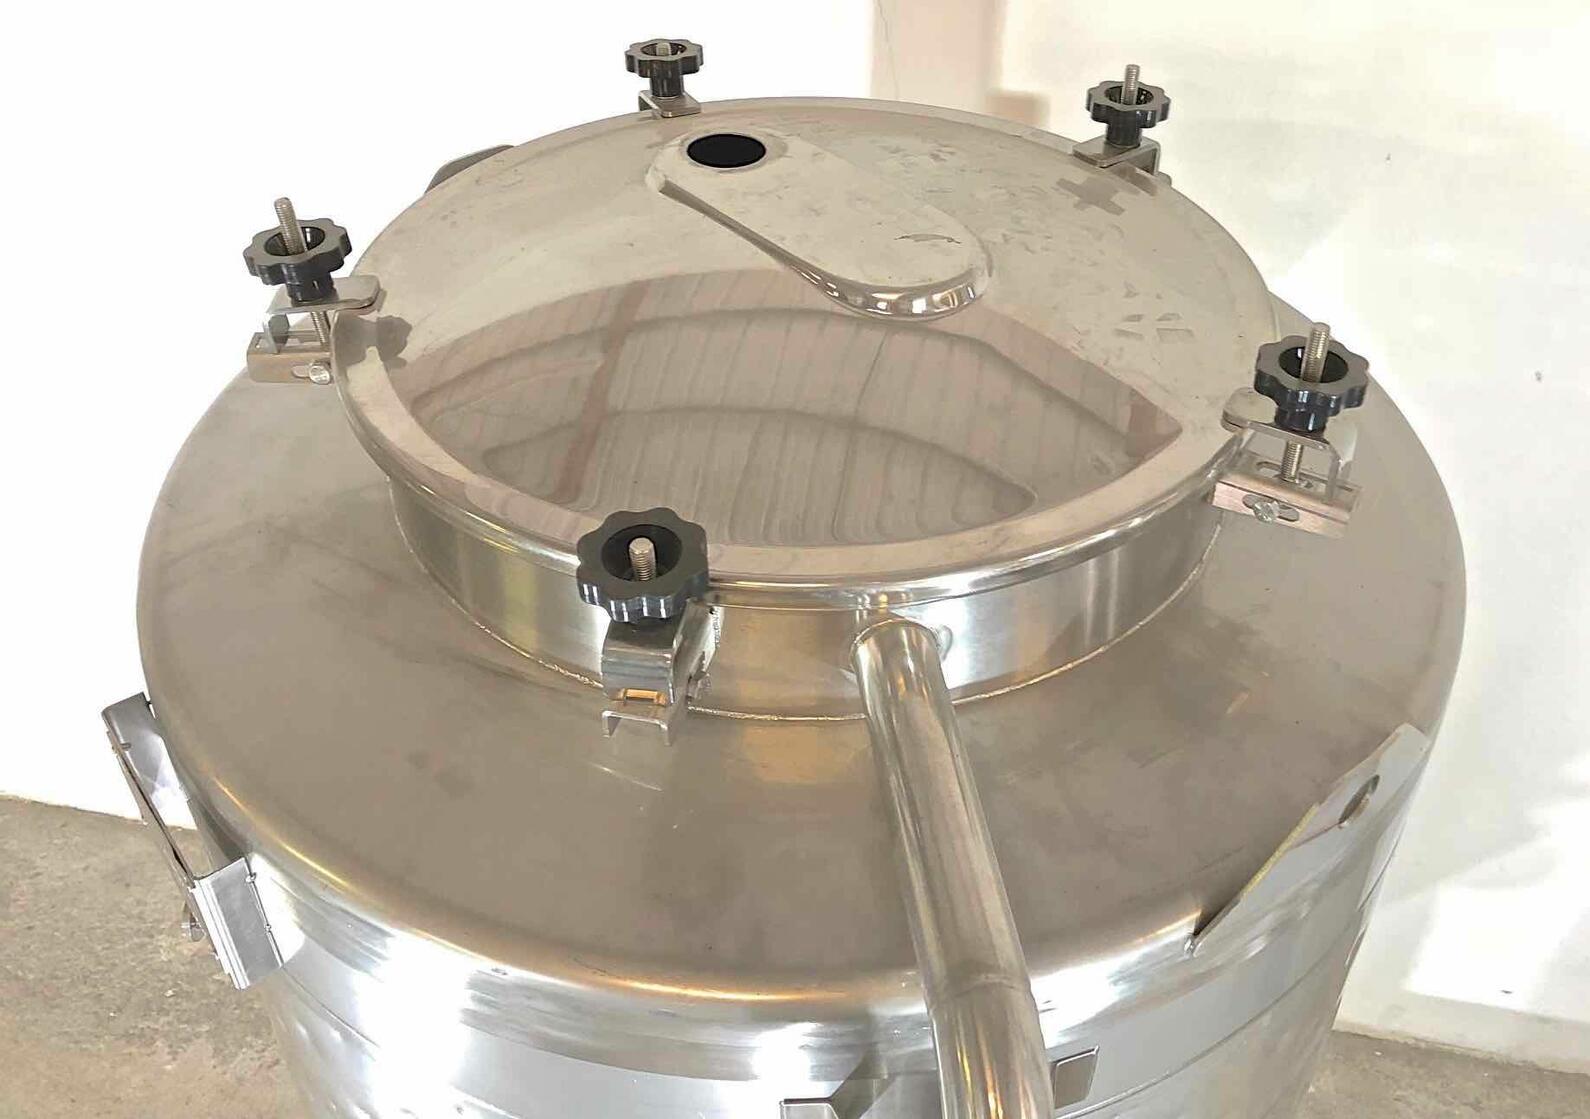 304 stainless steel vat - Closed on feet - Cylindro-conical